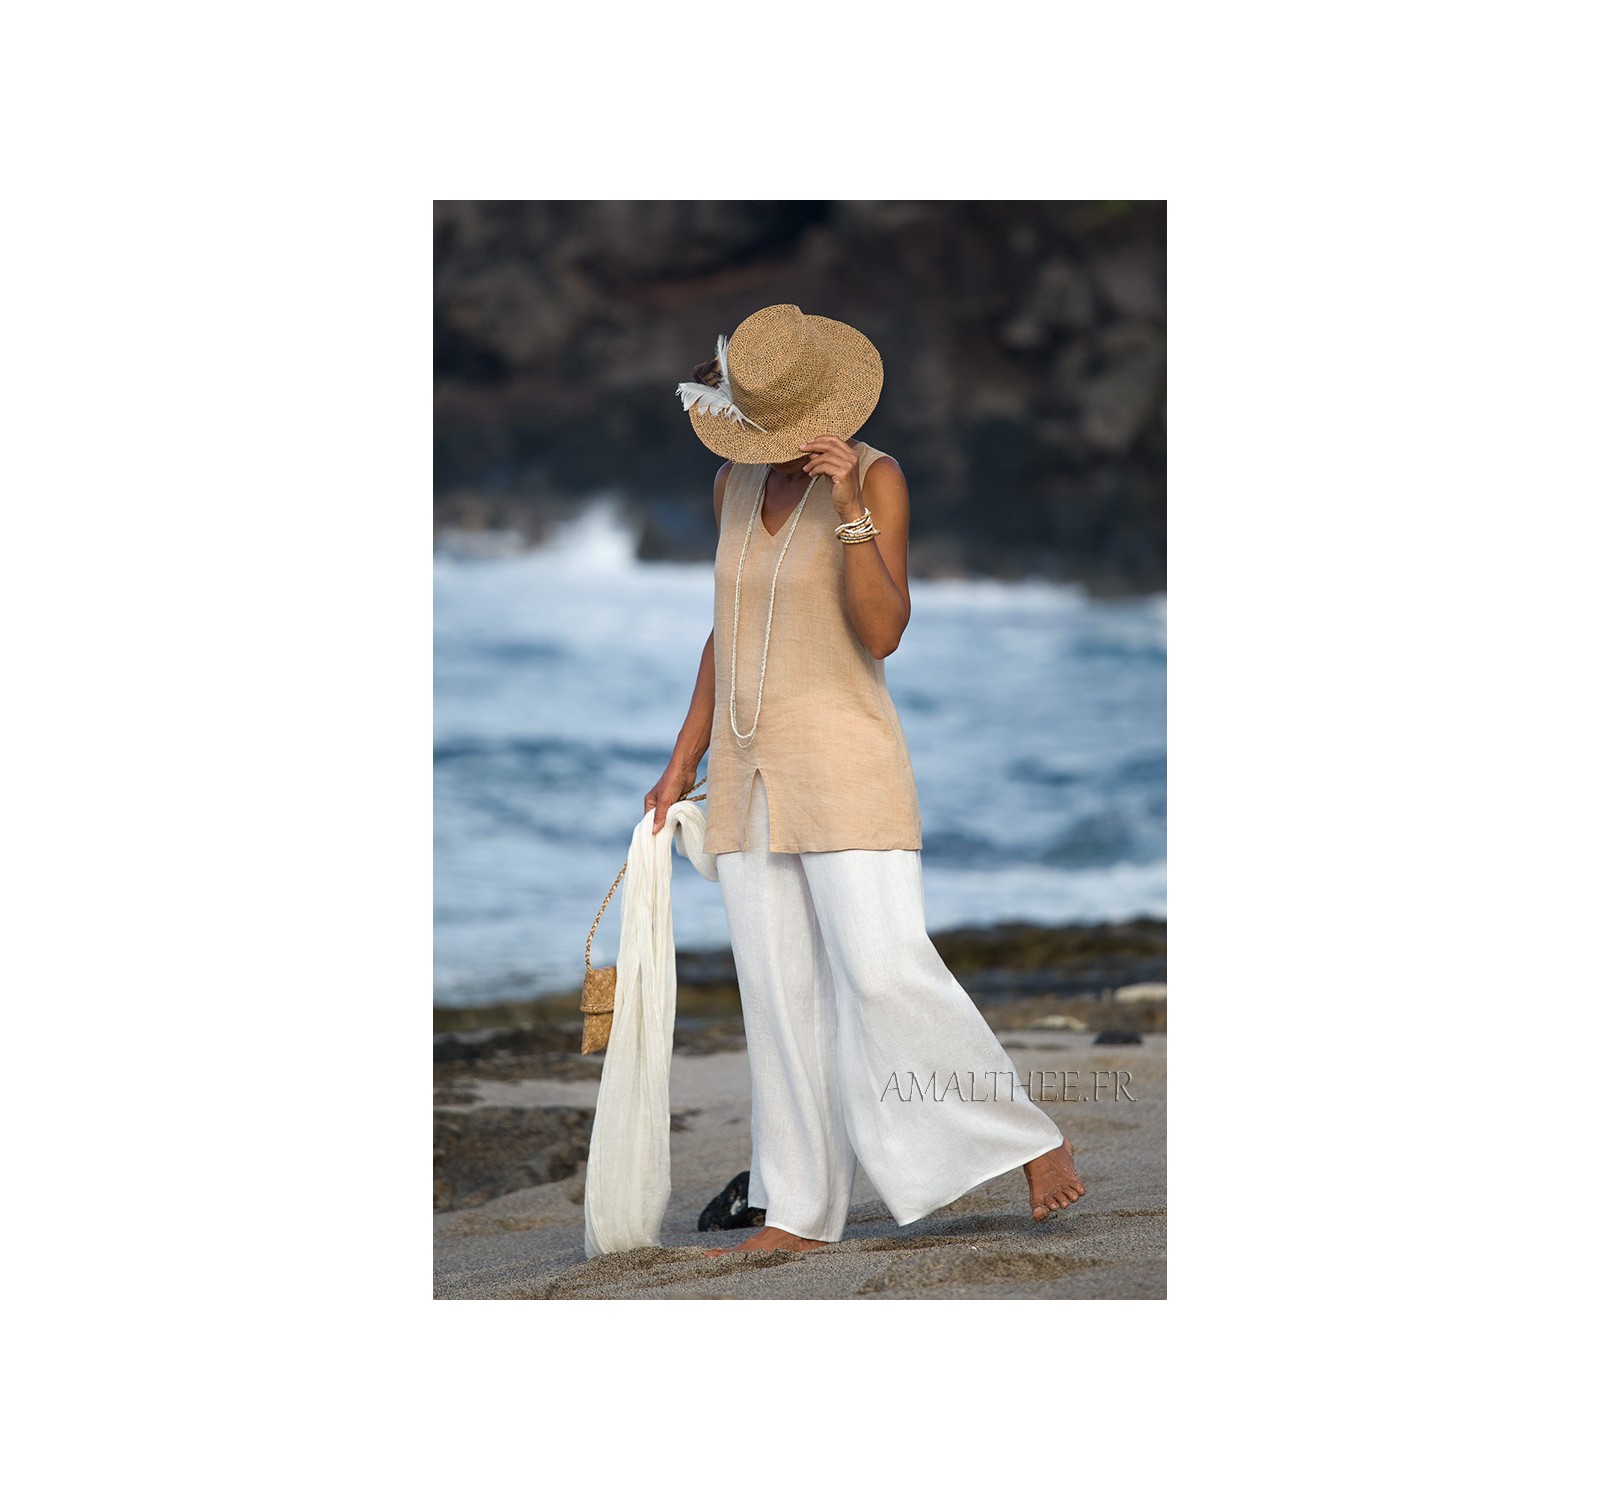 Flax linen summer outfit: beige top and white flare pants